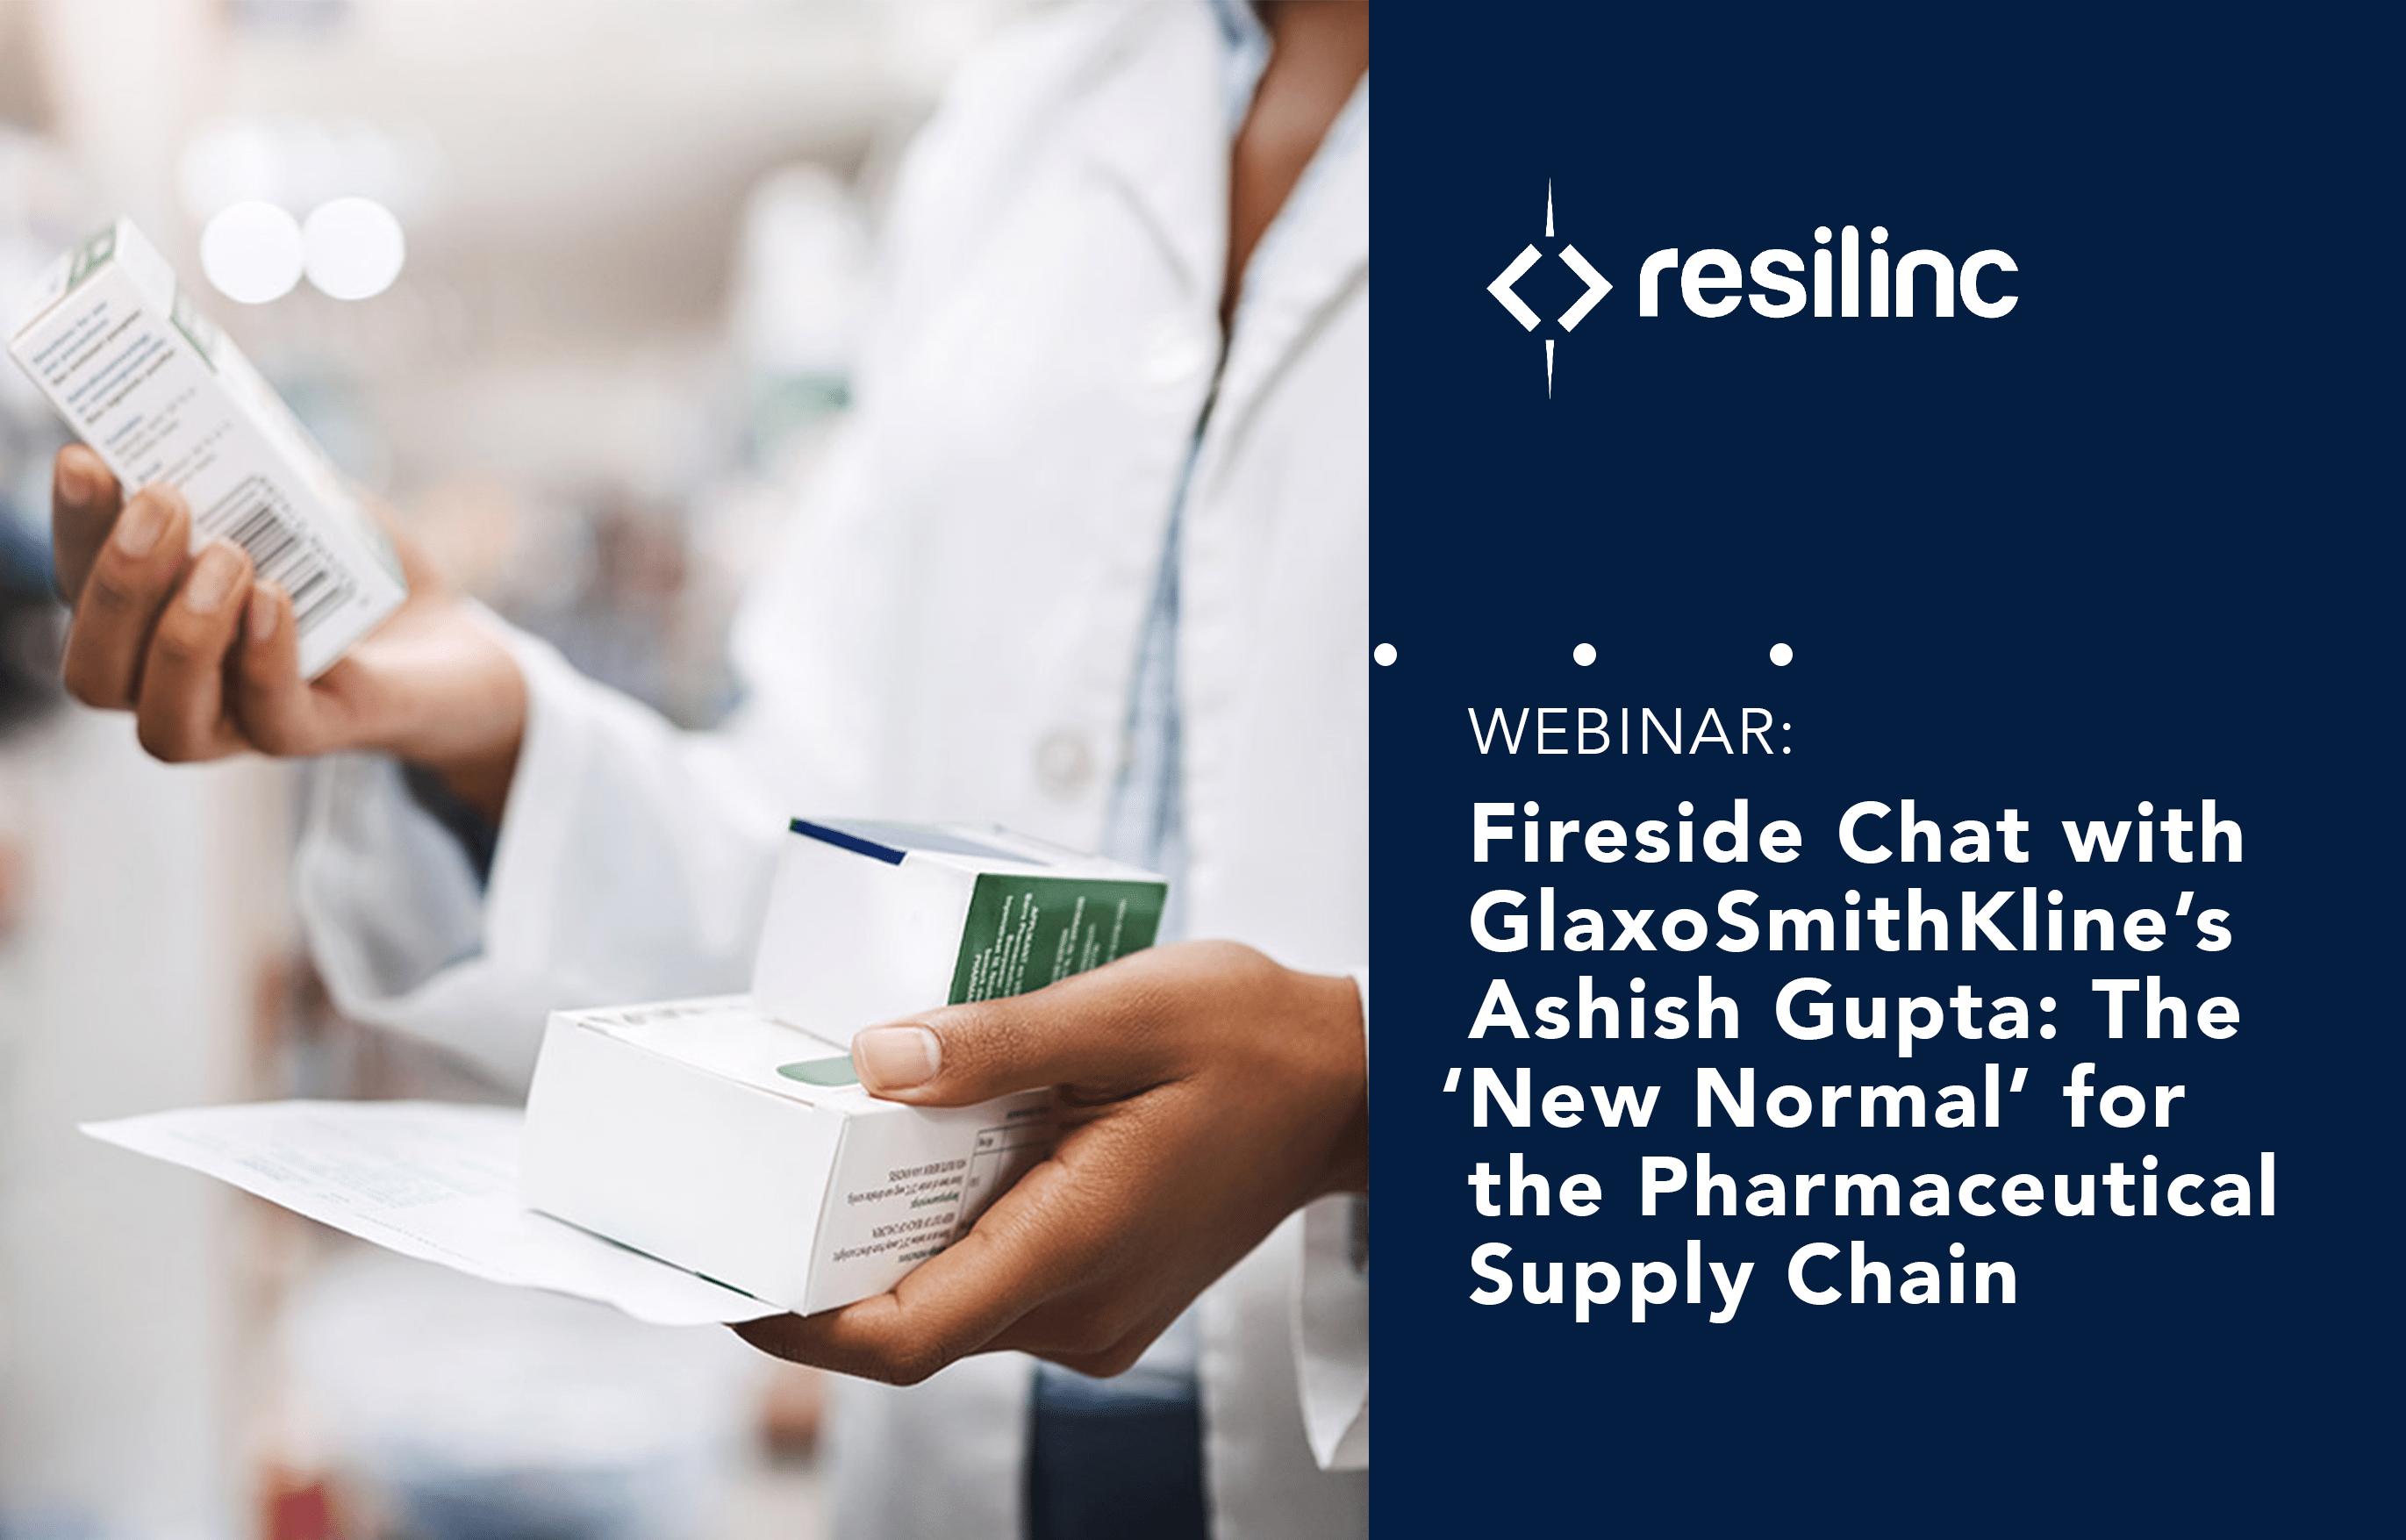 You are currently viewing Fireside Chat with GlaxoSmithKline’s Ashish Gupta: The ‘New Normal’ for the Pharmaceutical Supply Chain